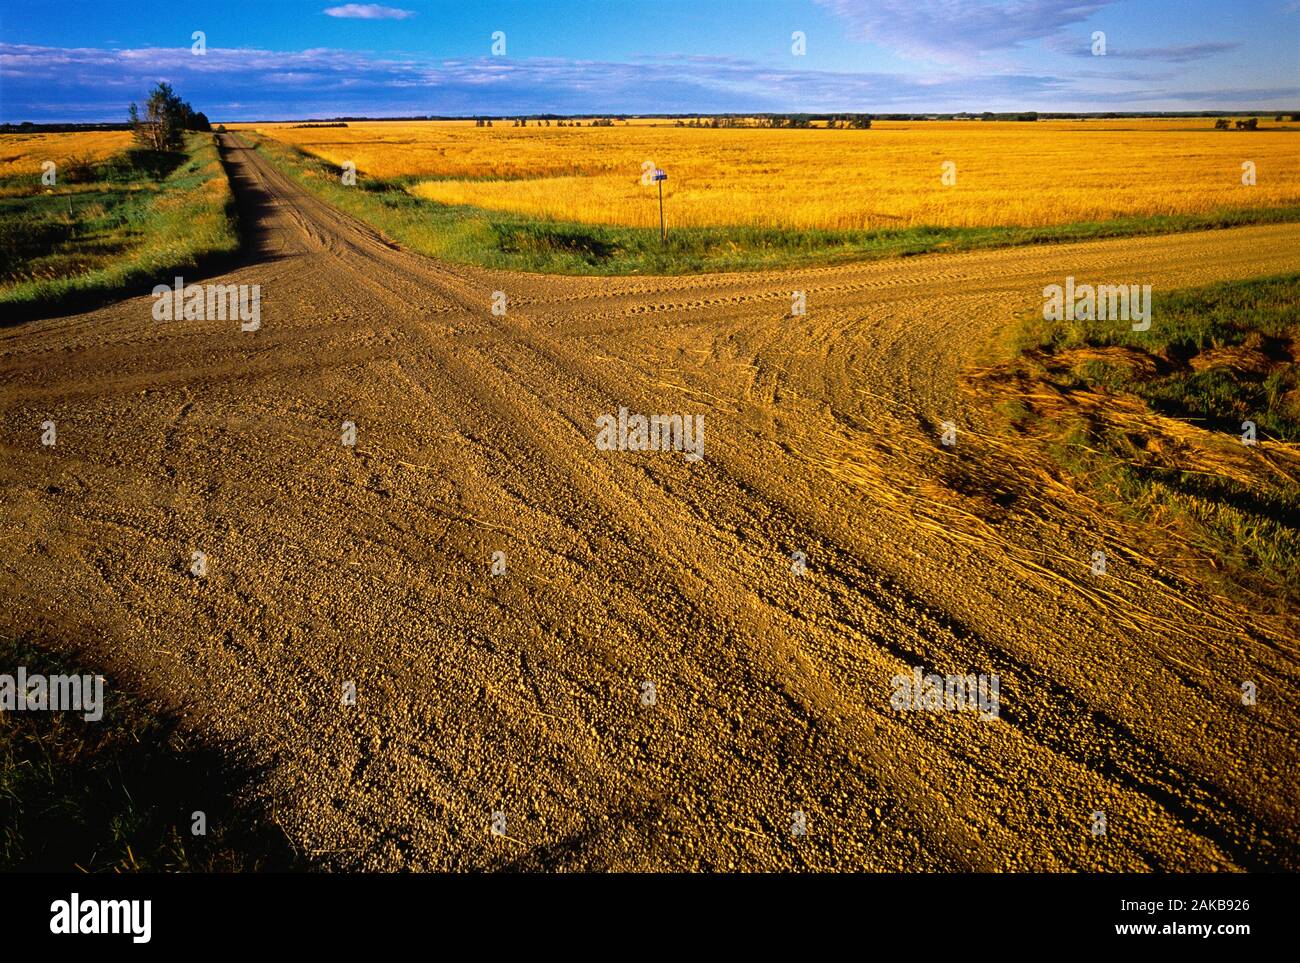 Countryside landscape with dirt road intersection and fields, Millet, Alberta, Canada Stock Photo